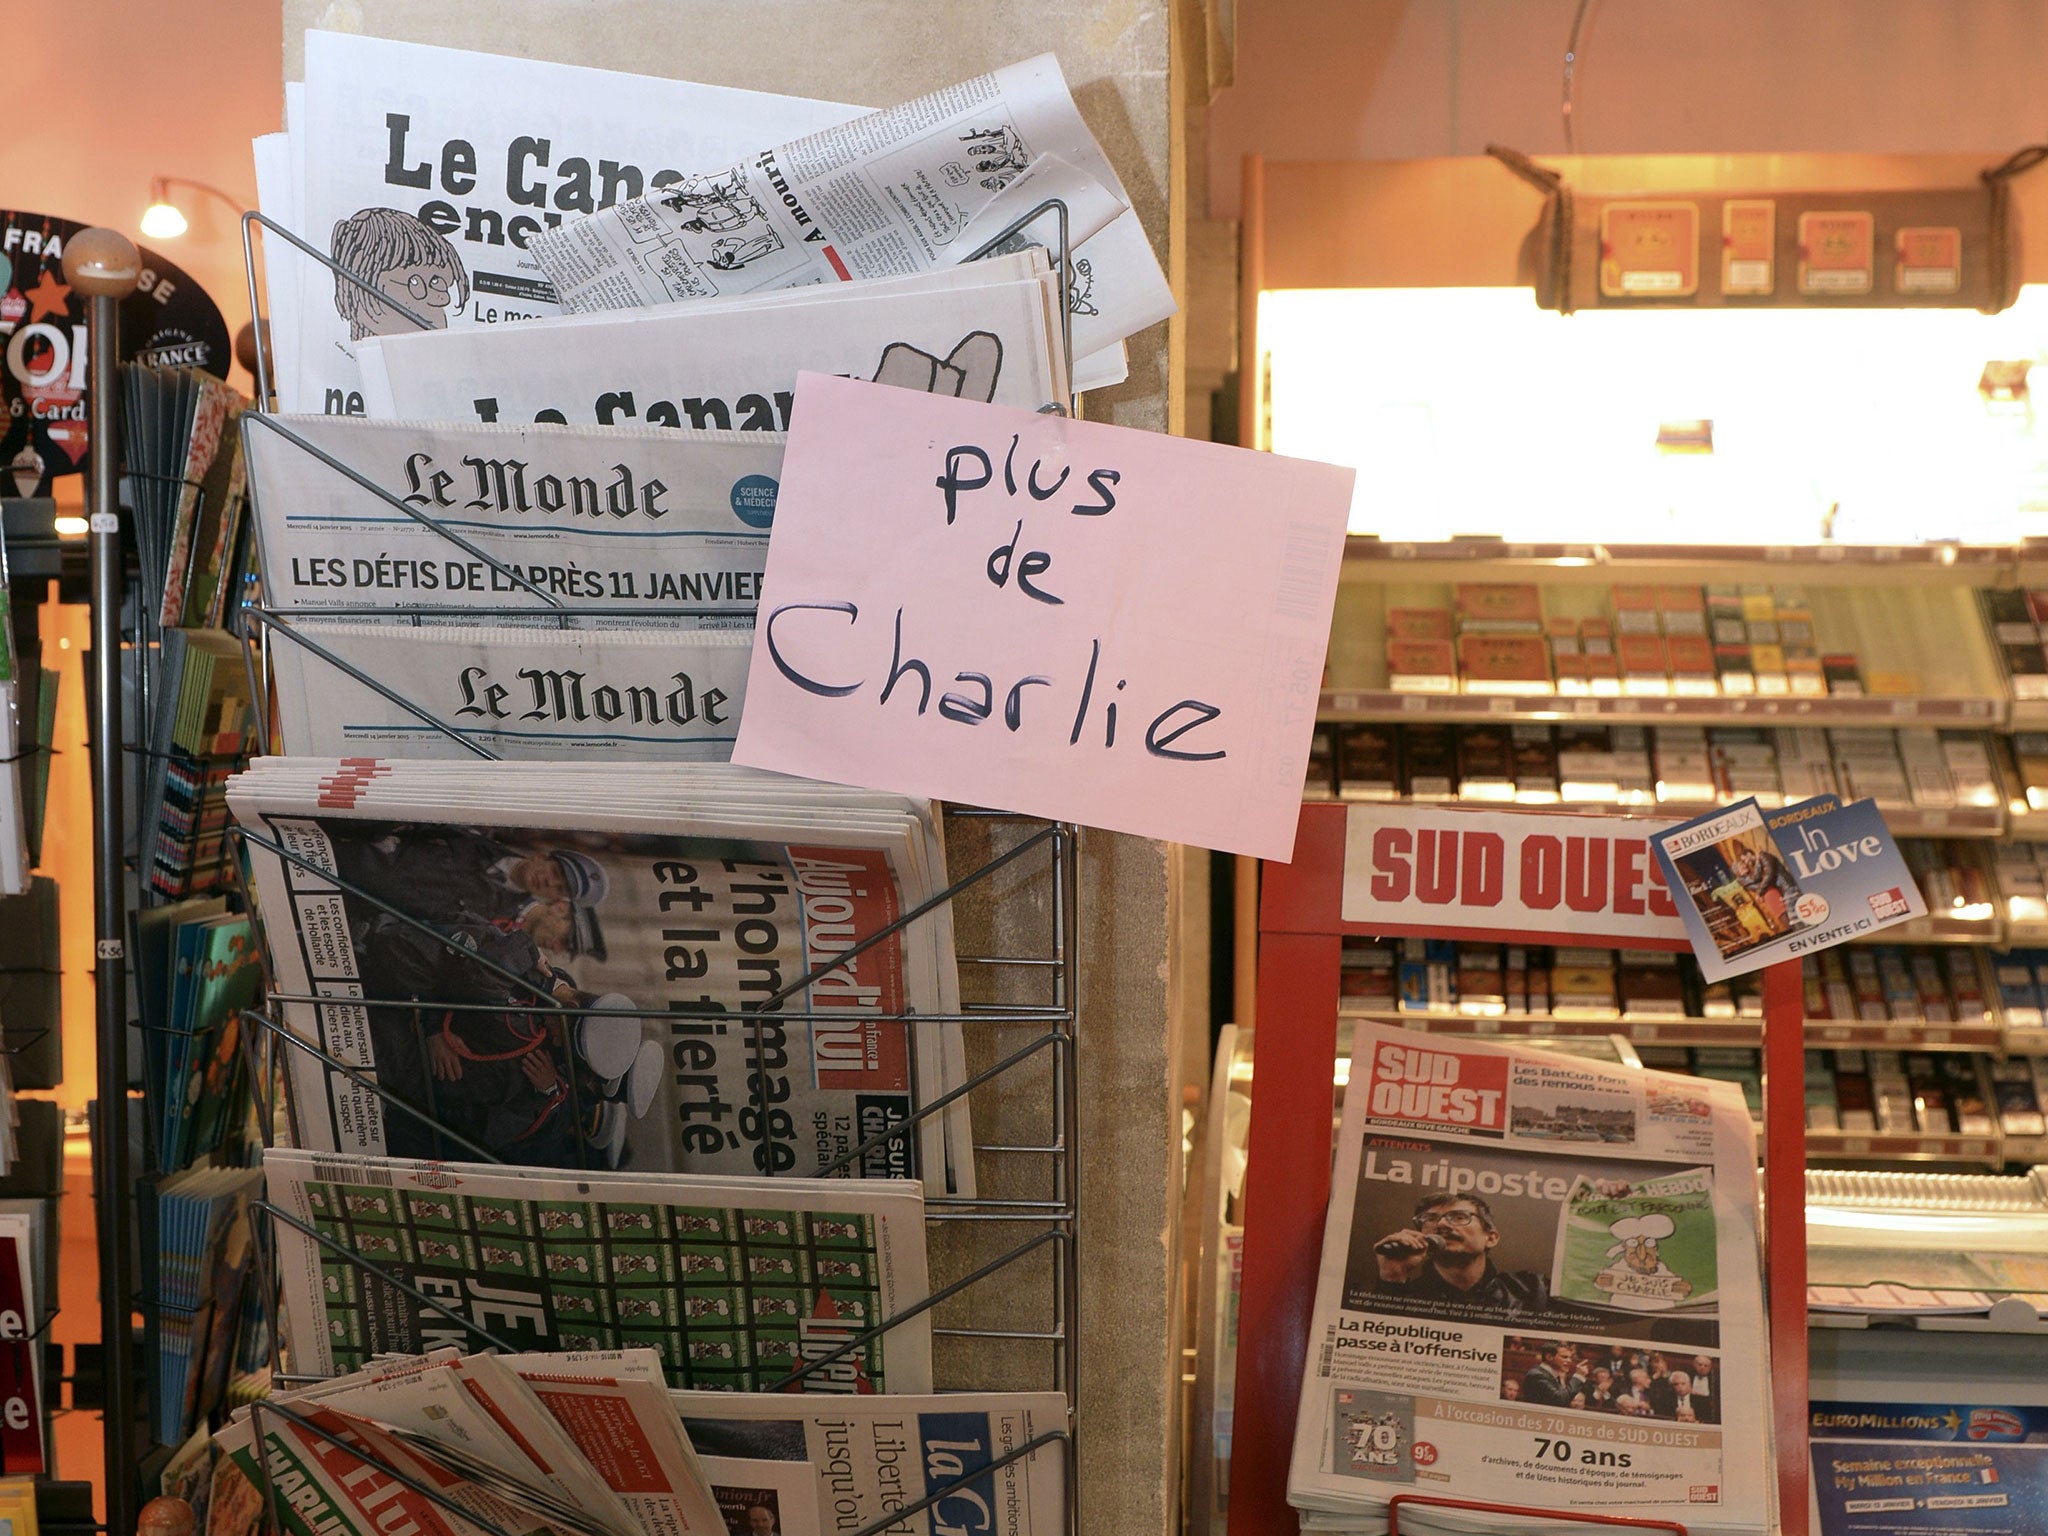 There has been unprecedented demand for the latest edition of Charlie Hebdo